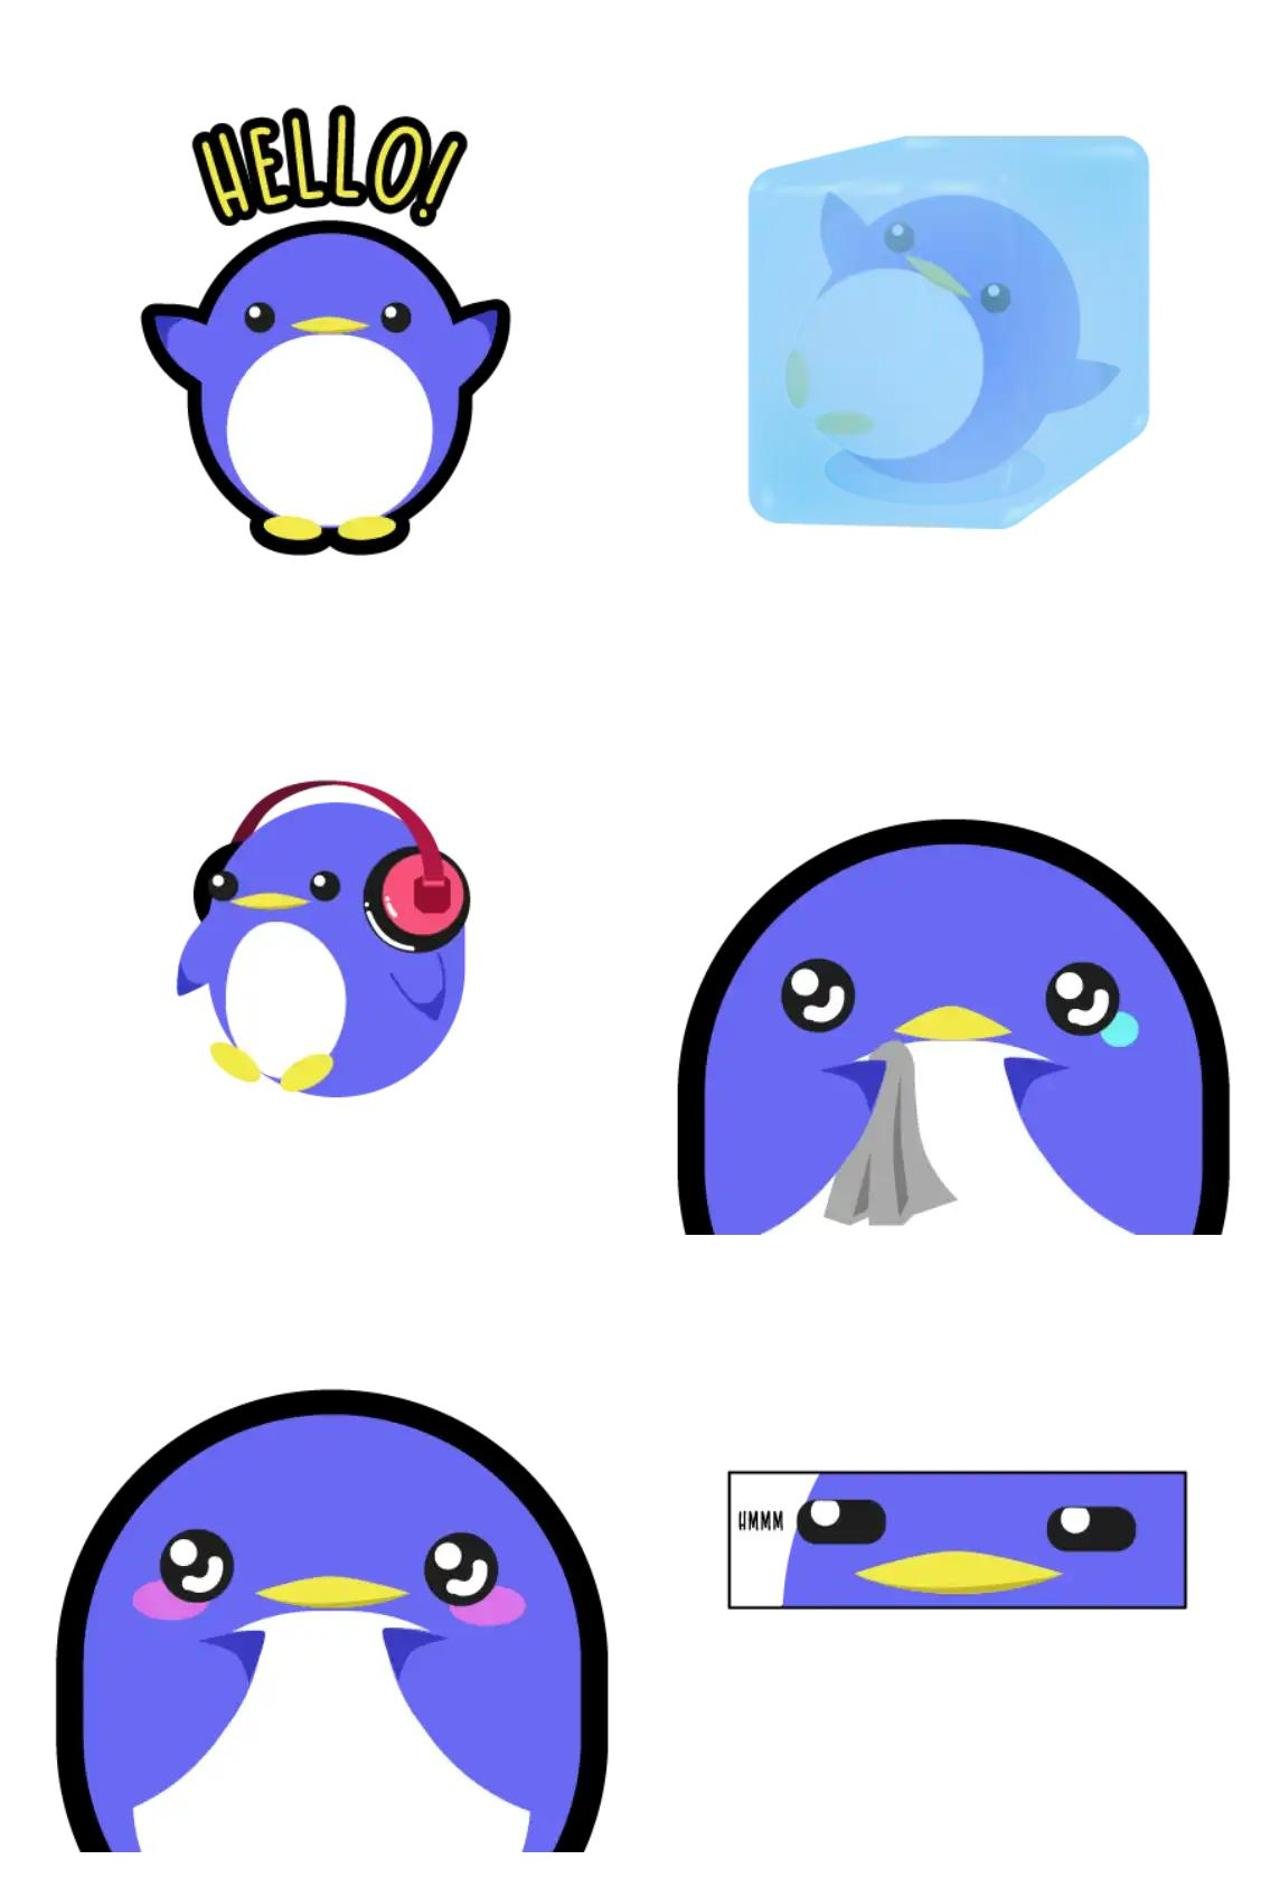 Sniper The Penguin Animation/Cartoon,Animals sticker pack for Whatsapp, Telegram, Signal, and others chatting and message apps